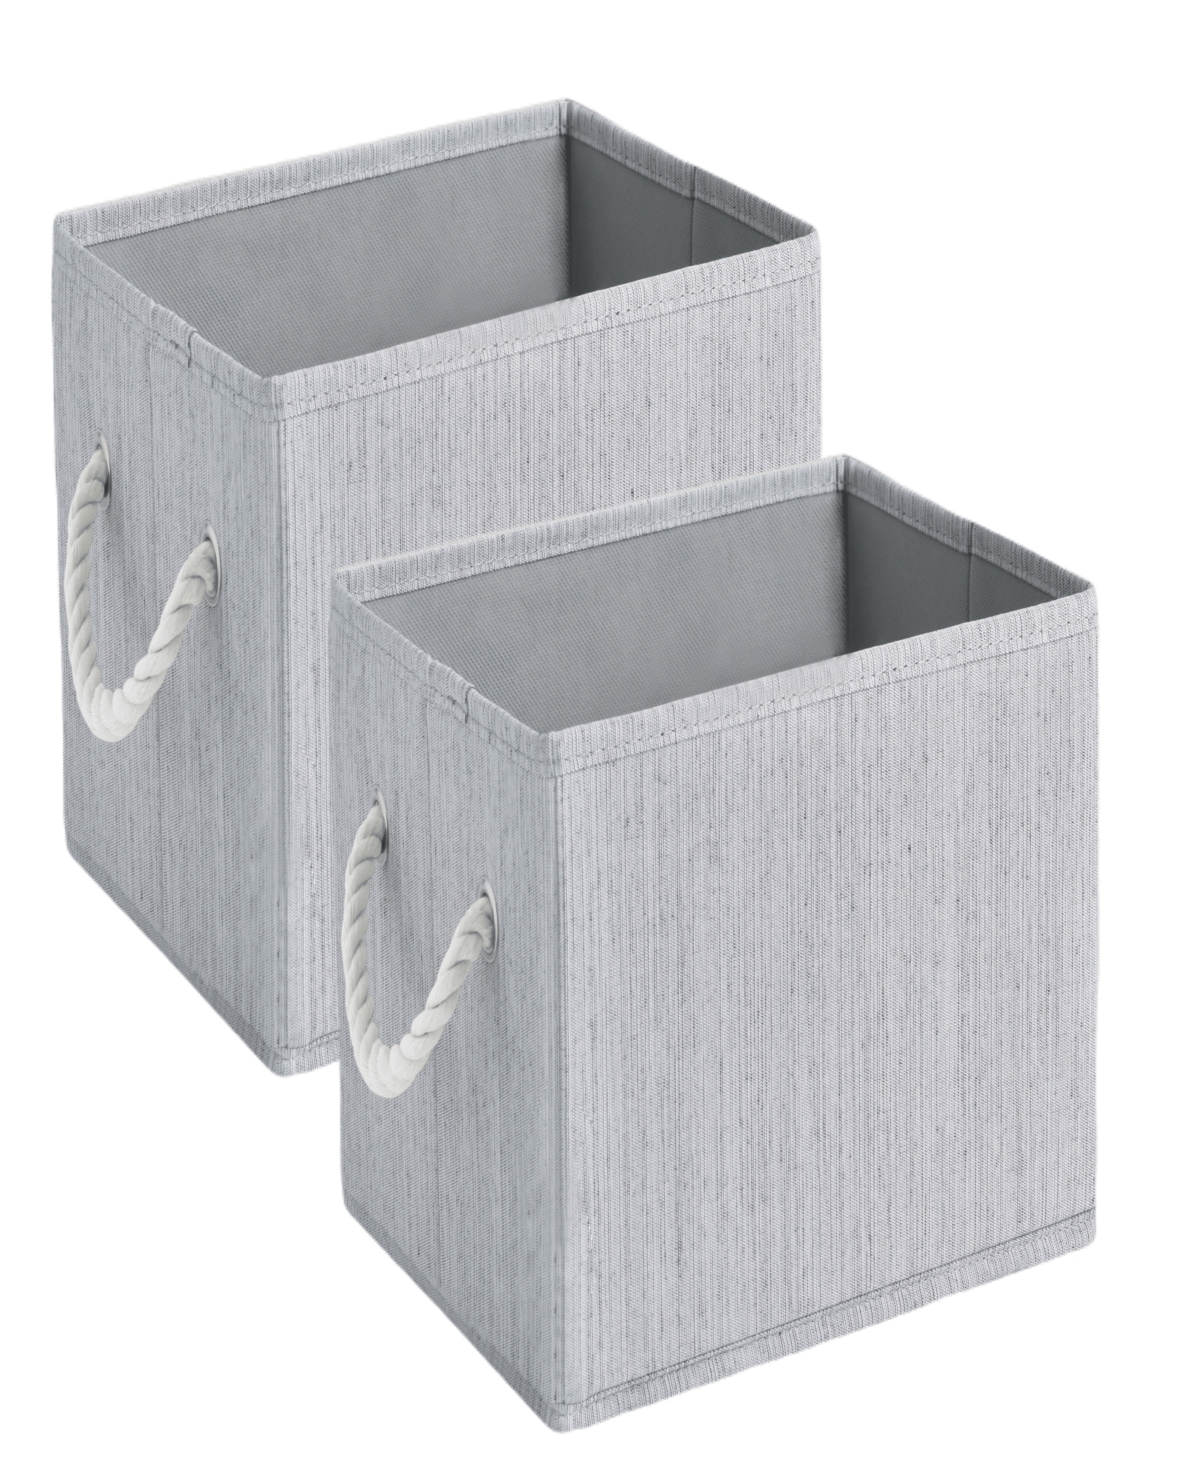 Wethinkstorage 11 Litre Collapsible Fabric Storage Bins With Cotton Rope Handles, Set Of 2 In Gray